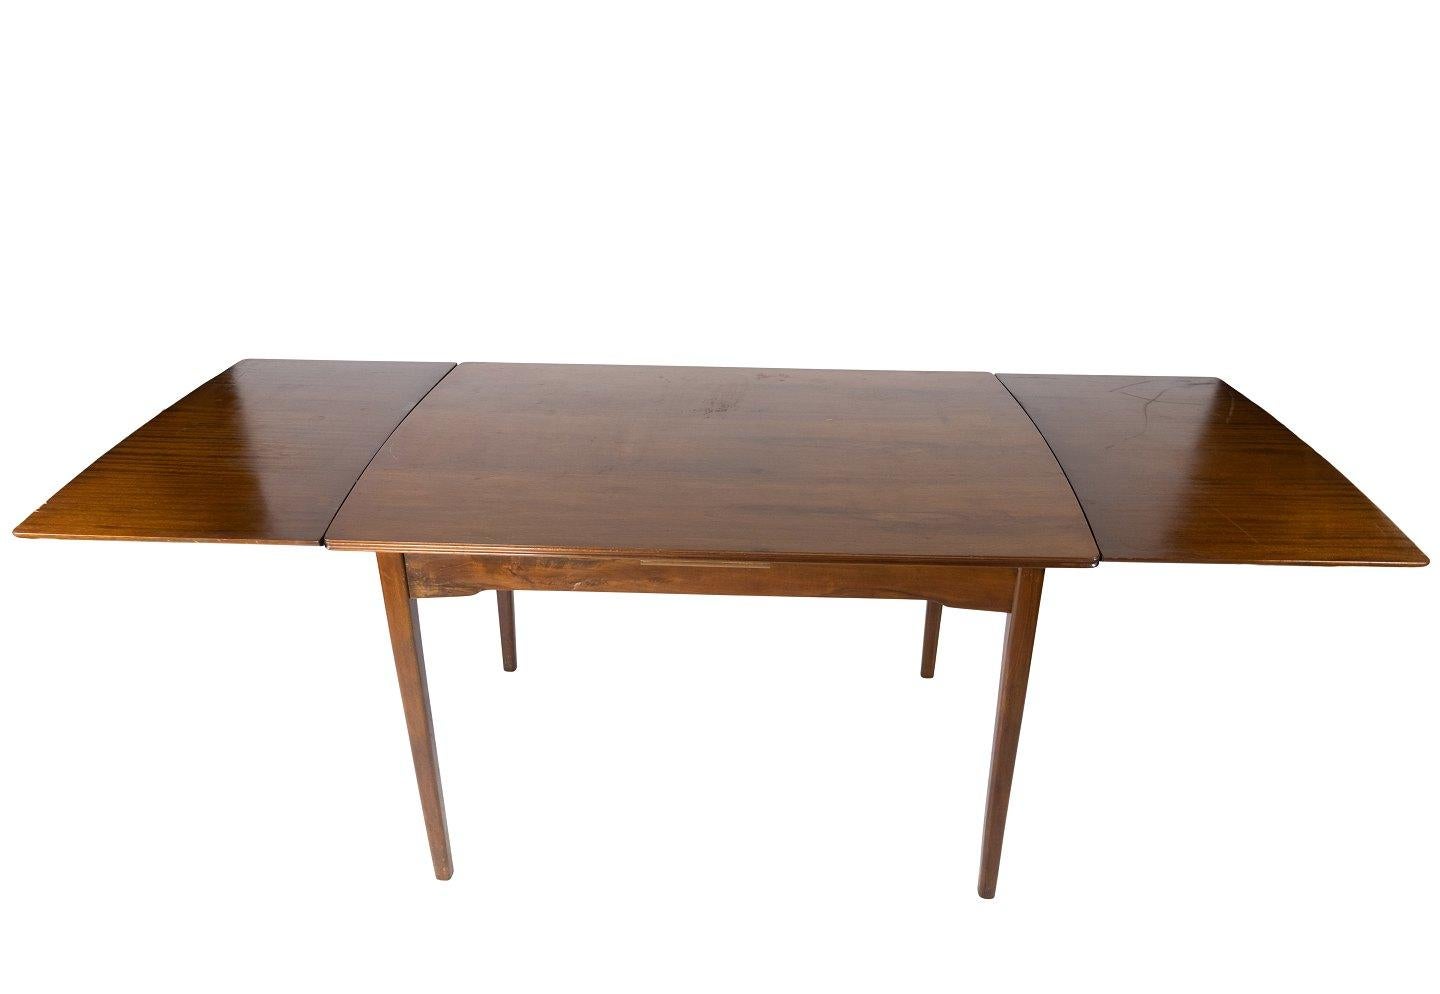 Scandinavian Modern Dining Table in Walnut with Extension of Danish Design from the 1960s